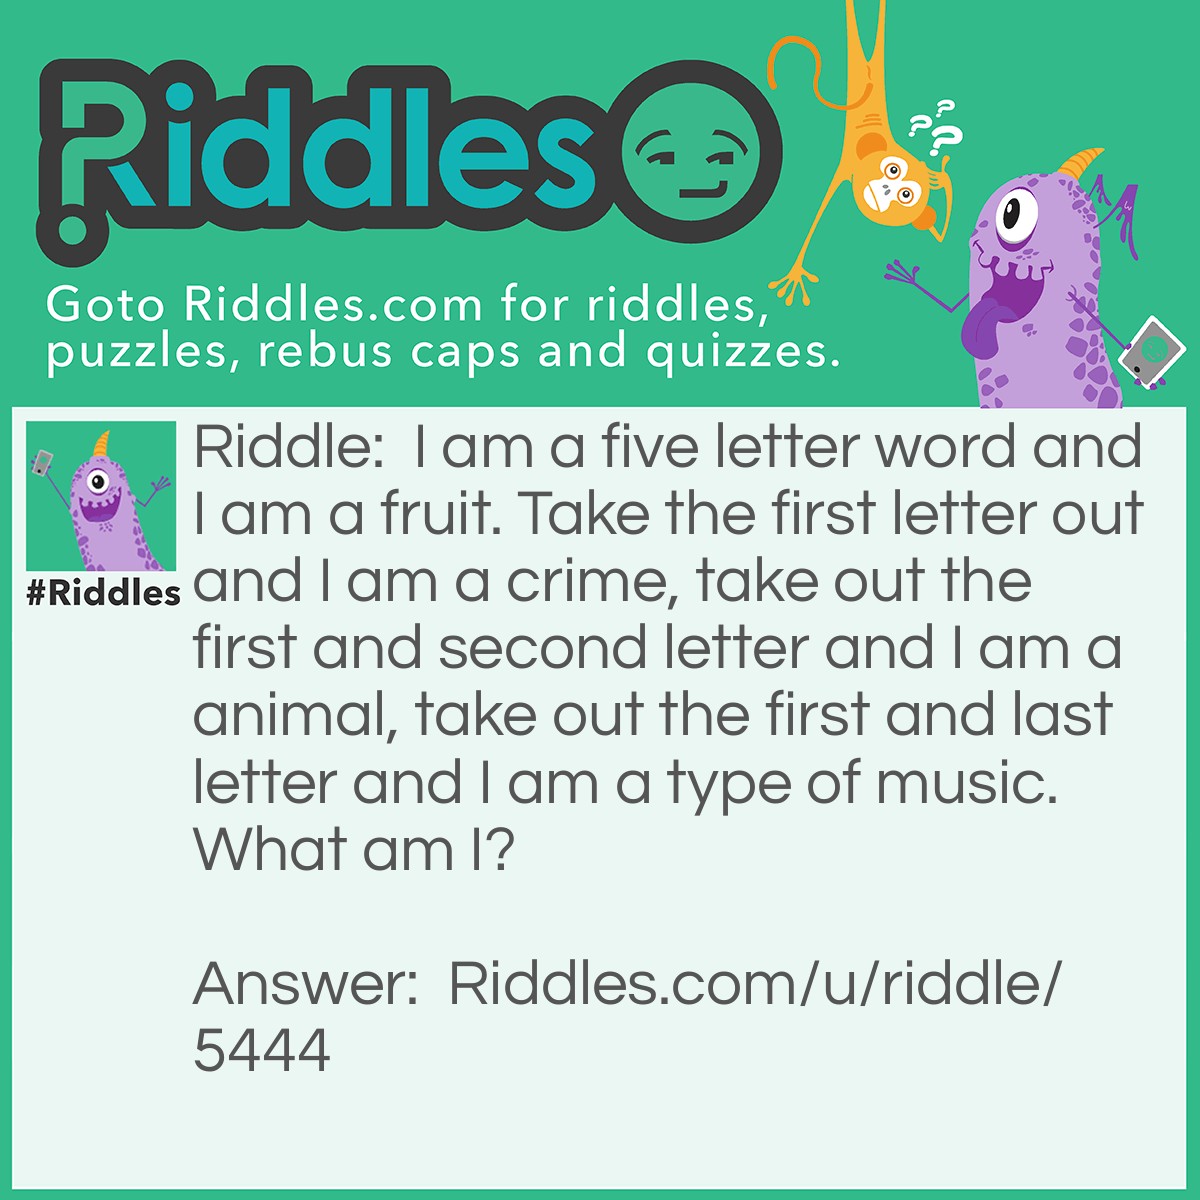 Riddle: I am a five letter word and I am a fruit. Take the first letter out and I am a crime, take out the first and second letter and I am a animal, take out the first and last letter and I am a type of music. What am I? Answer: Grape. If you take out the letters, it would be rape, ape, and rap.